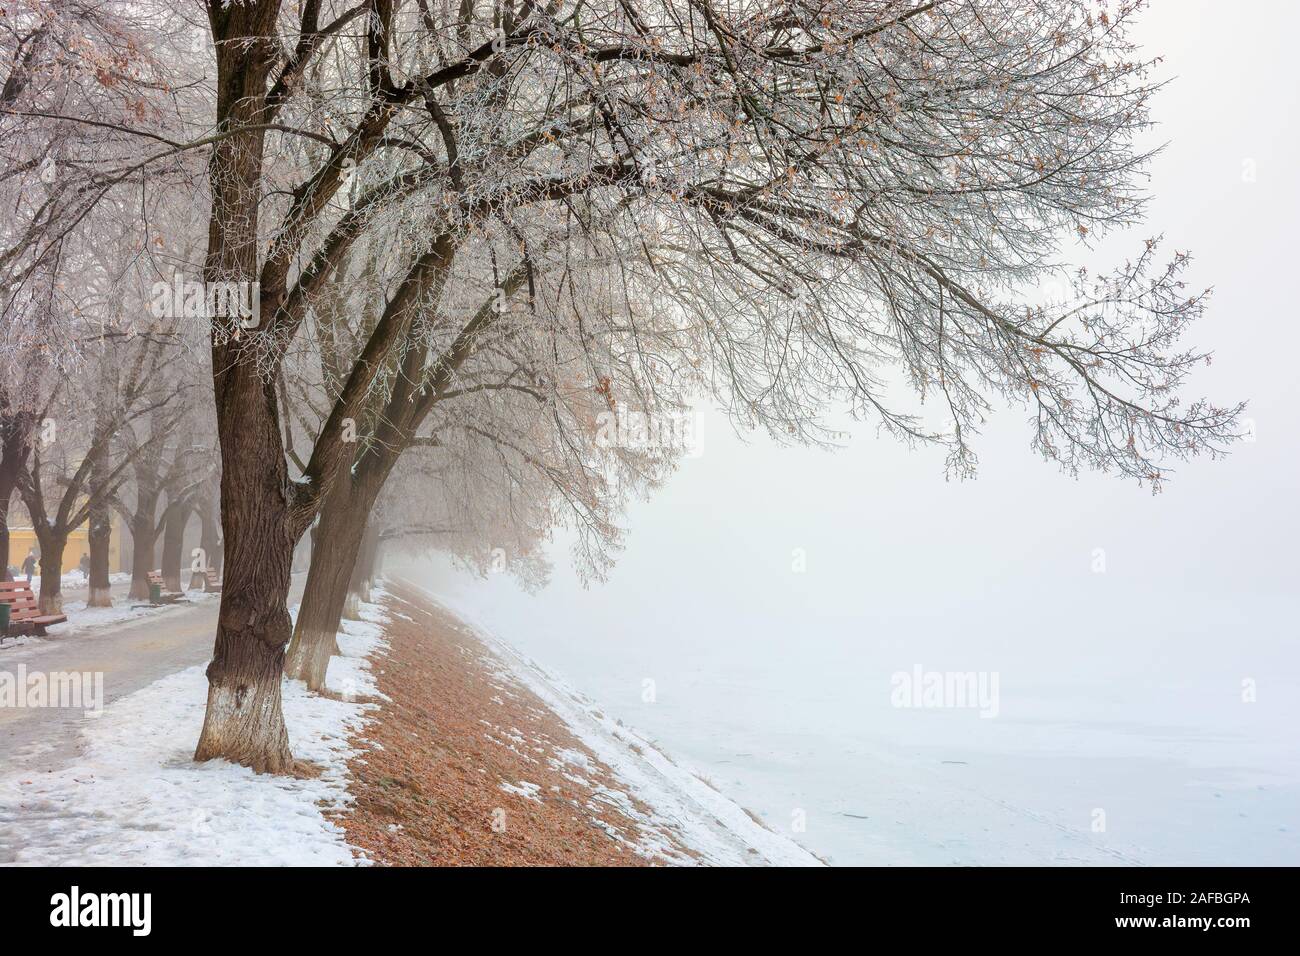 the longest linden alley in winter. beautiful urban scenery of embankment covered in snow and brown fallen foliage. enchanting foggy weather in the mo Stock Photo